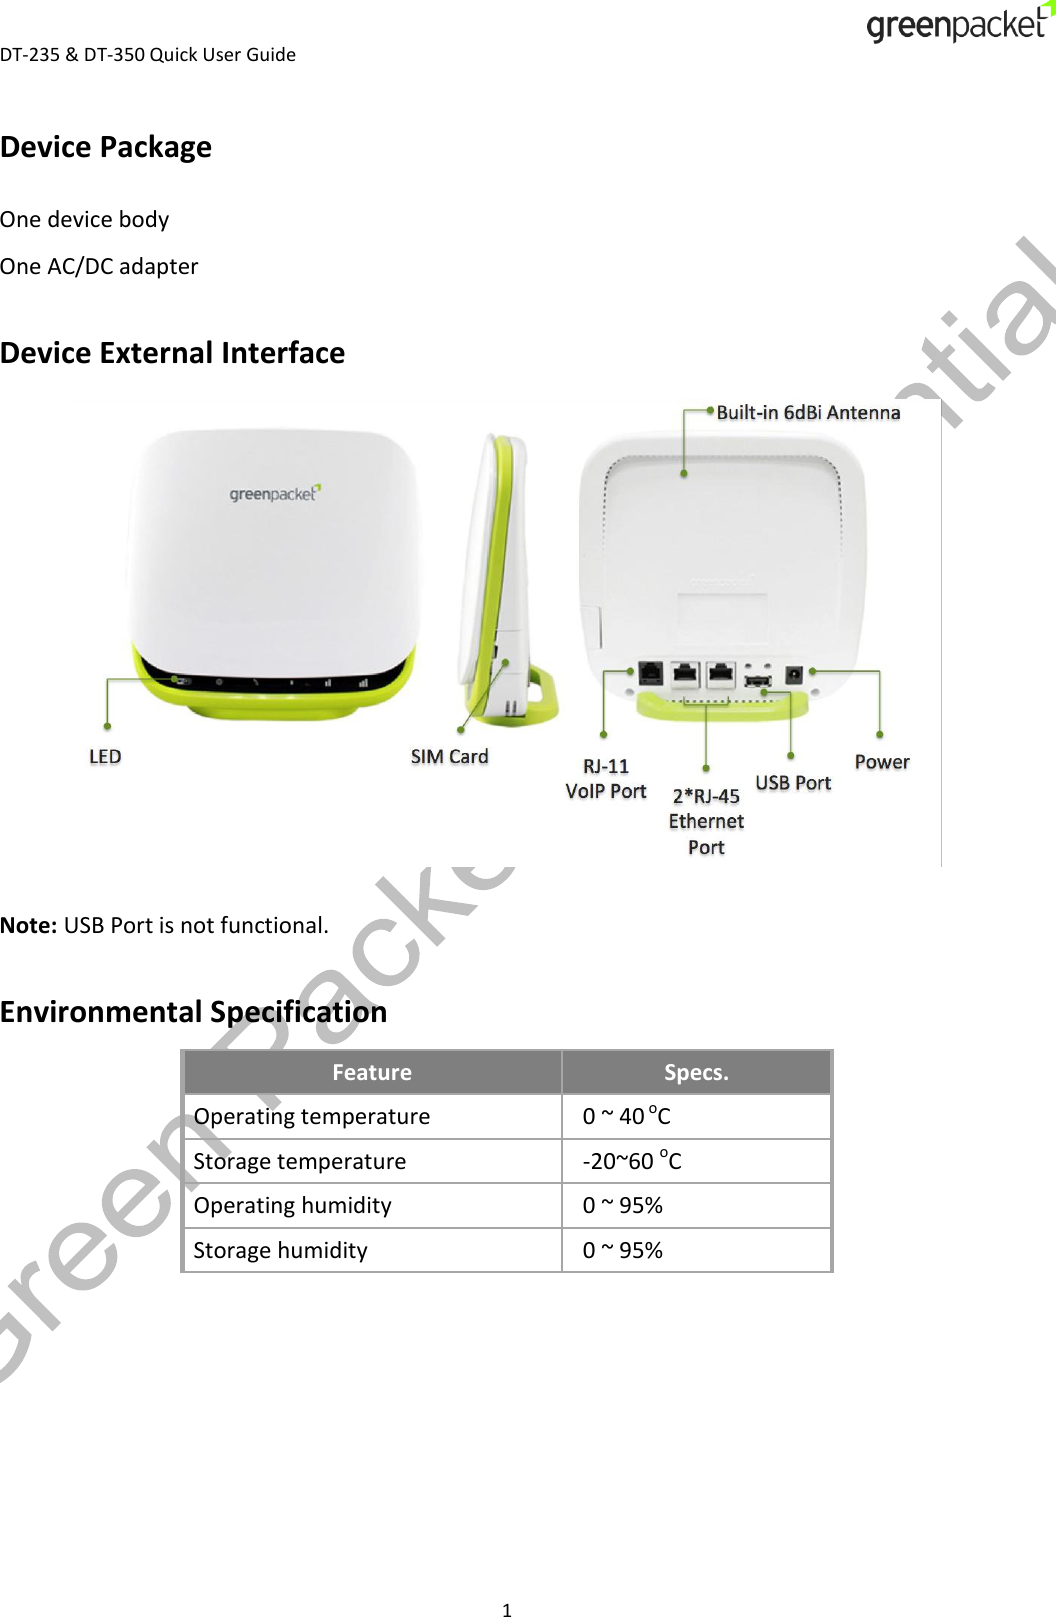  DT-235 &amp; DT-350 Quick User Guide  1 Device Package One device body One AC/DC adapter Device External Interface  Note: USB Port is not functional. Environmental Specification Feature Specs. Operating temperature 0 ~ 40 oC Storage temperature -20~60 oC Operating humidity 0 ~ 95%  Storage humidity 0 ~ 95%    